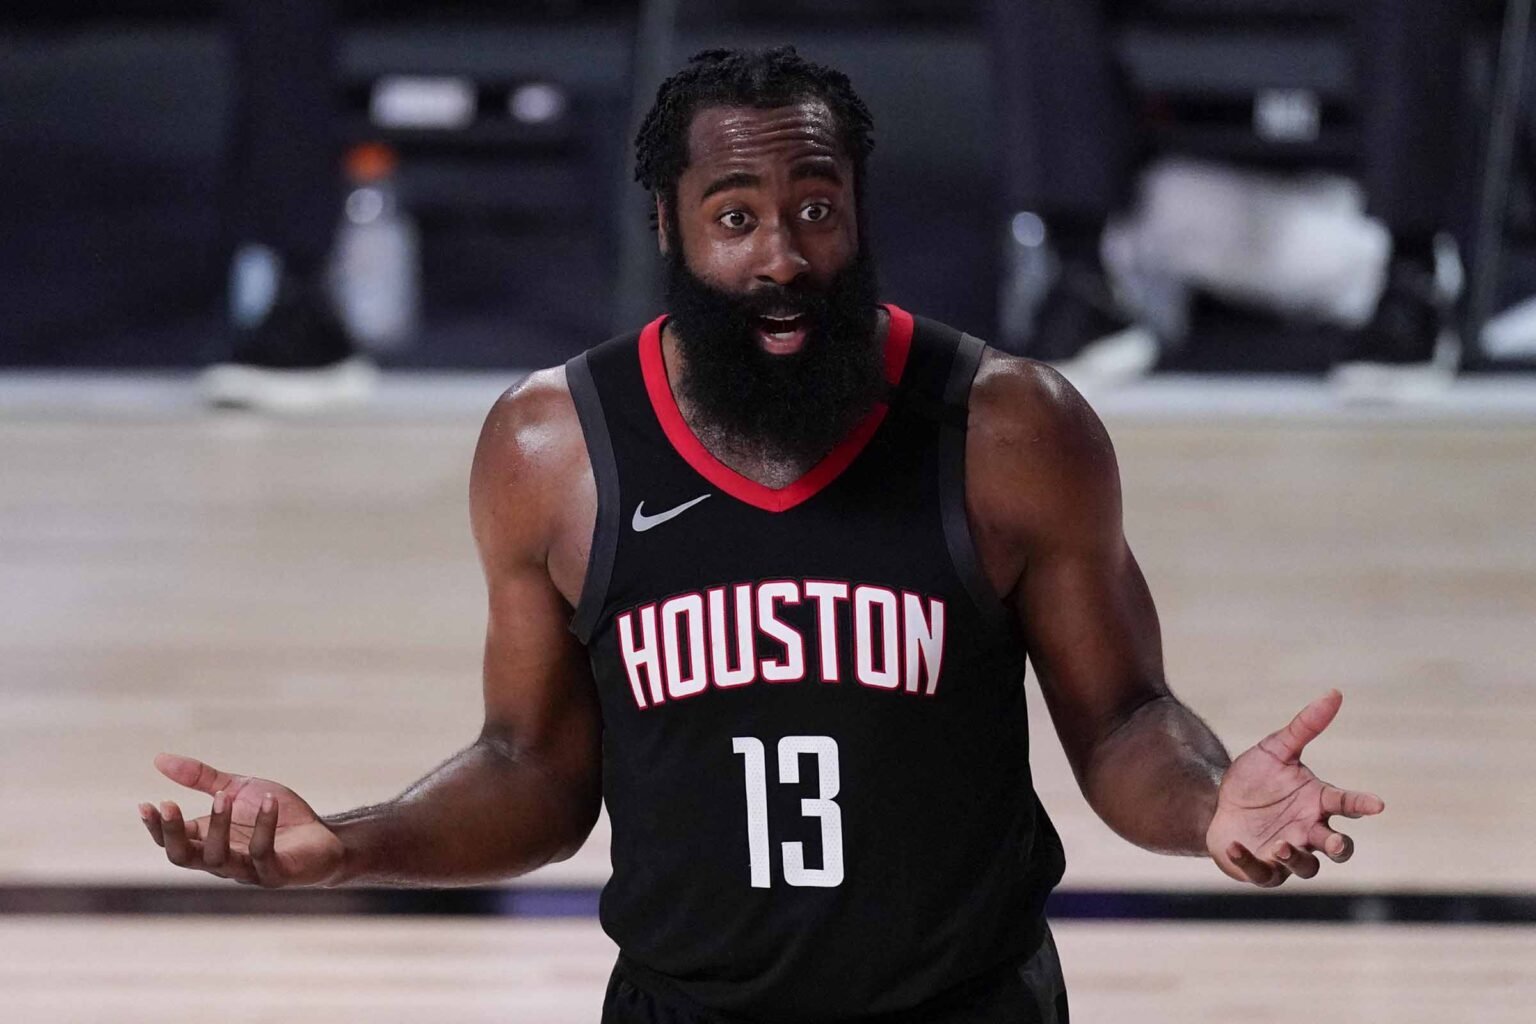 James Harden is leaving Houston soon. He's requested a trade after 8 seasons with the Rockets. Read all about his stats proving his best fit here.